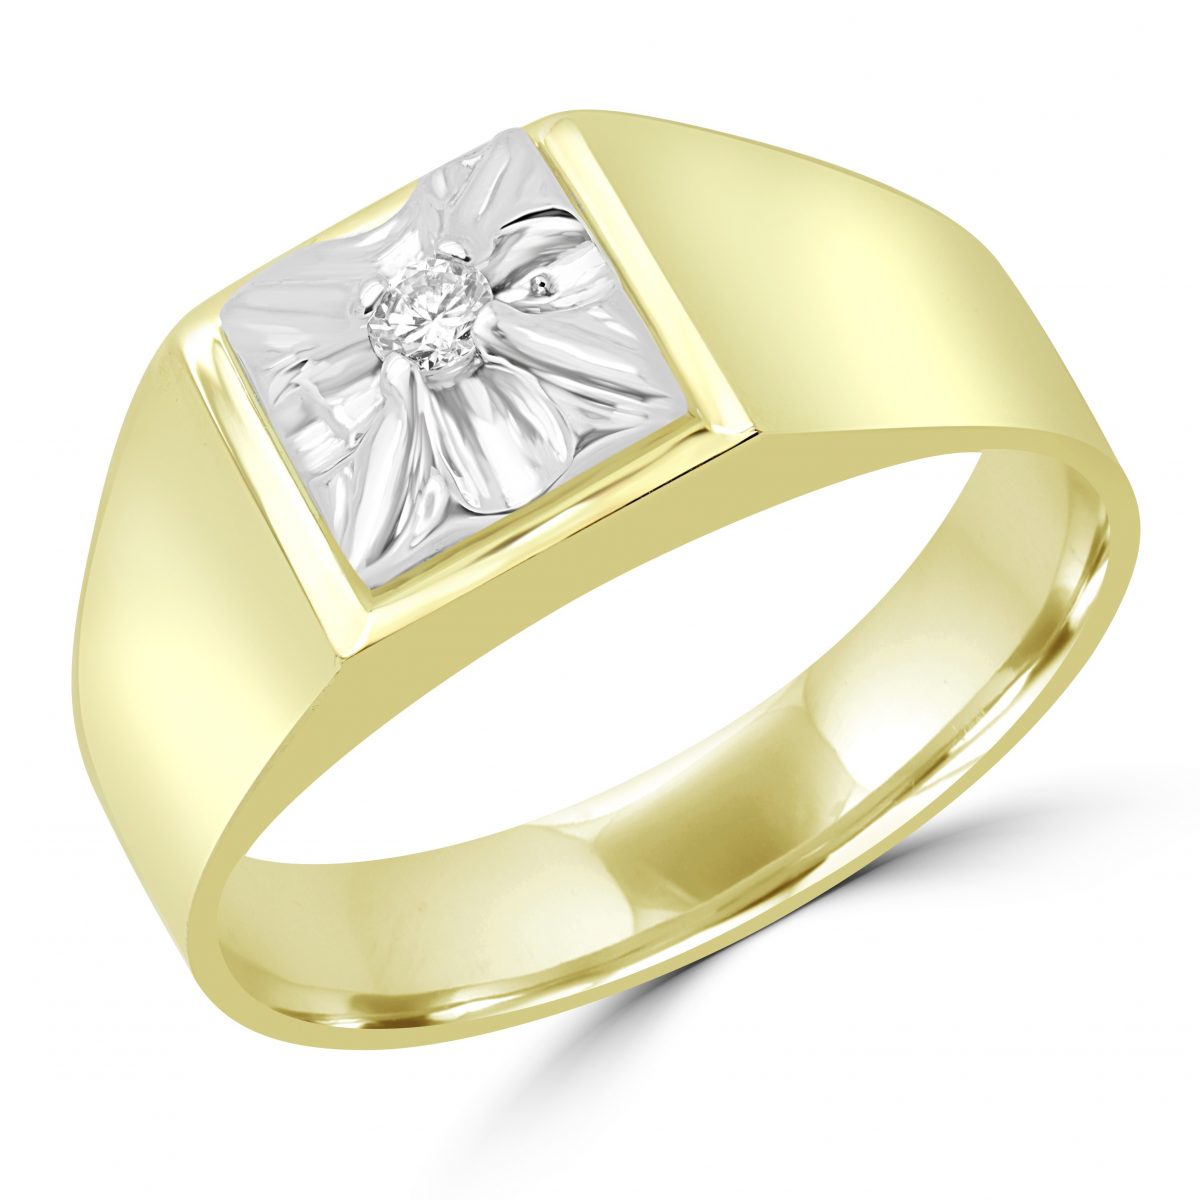 Round diamond accent men’s stylish ring in yellow gold